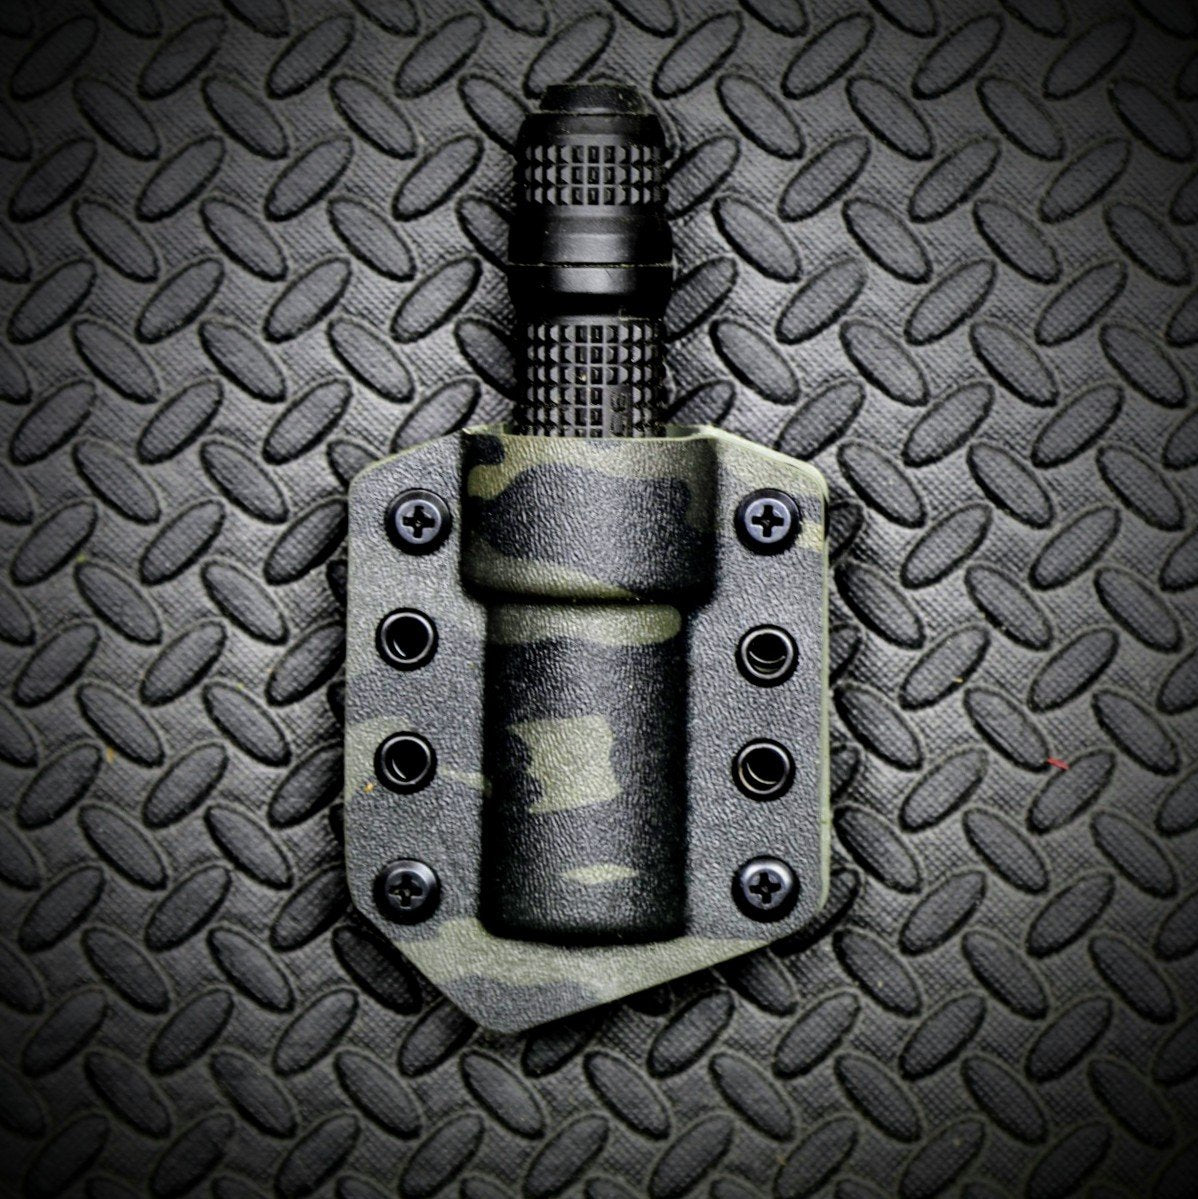 React FL-2 Flashlight Holster for Surefire, Streamlight, Inforce, Fenix Flashlights - Multicam Black (Pre-made) Kydex Holsters and Mag Pouches